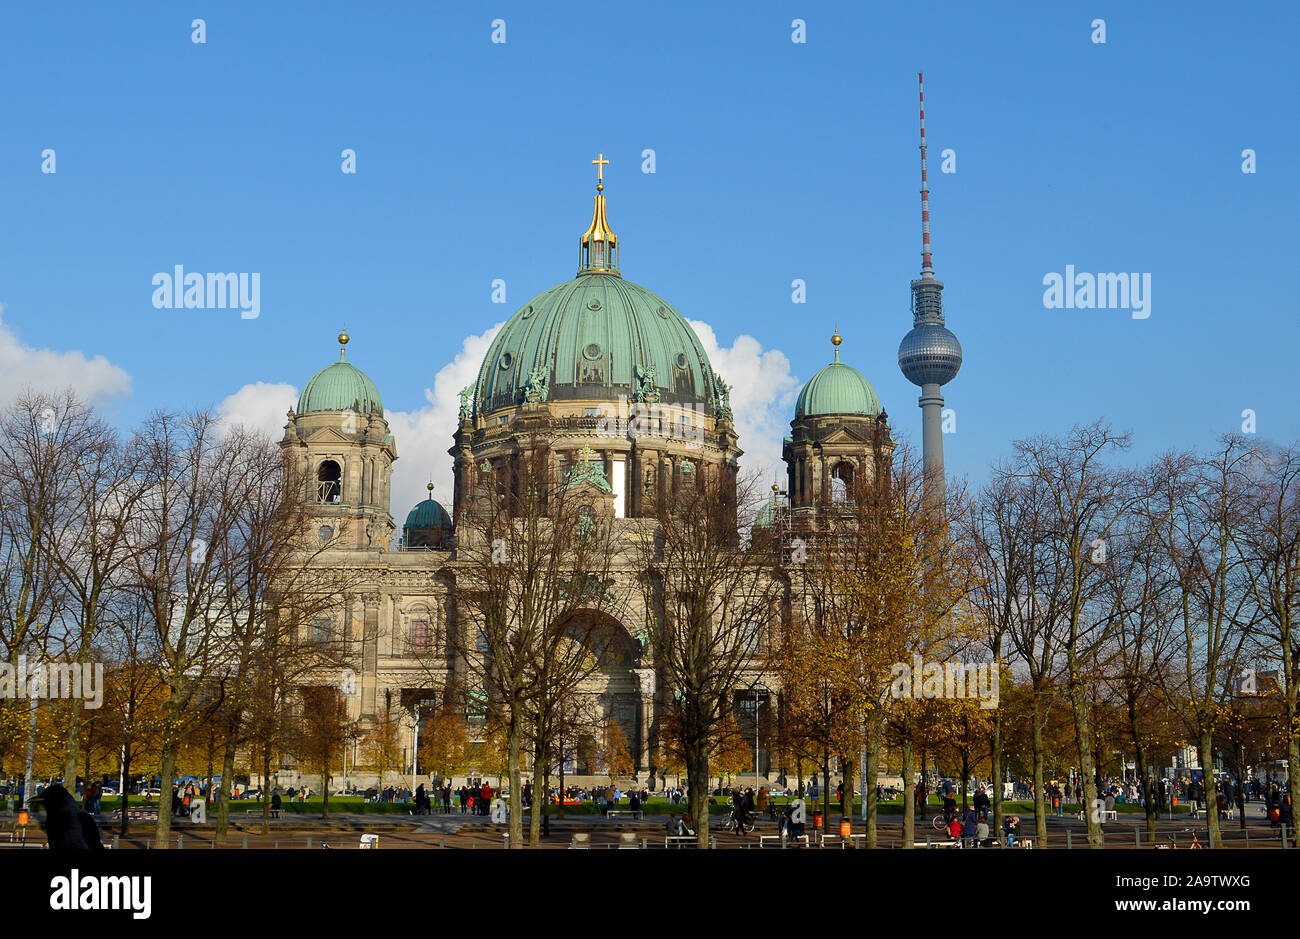 Berliner Dom (Berlin Cathedral) on an Autumn Sunday morning with the Fernsehturm (Television Tower) from the communist era beside it Stock Photo